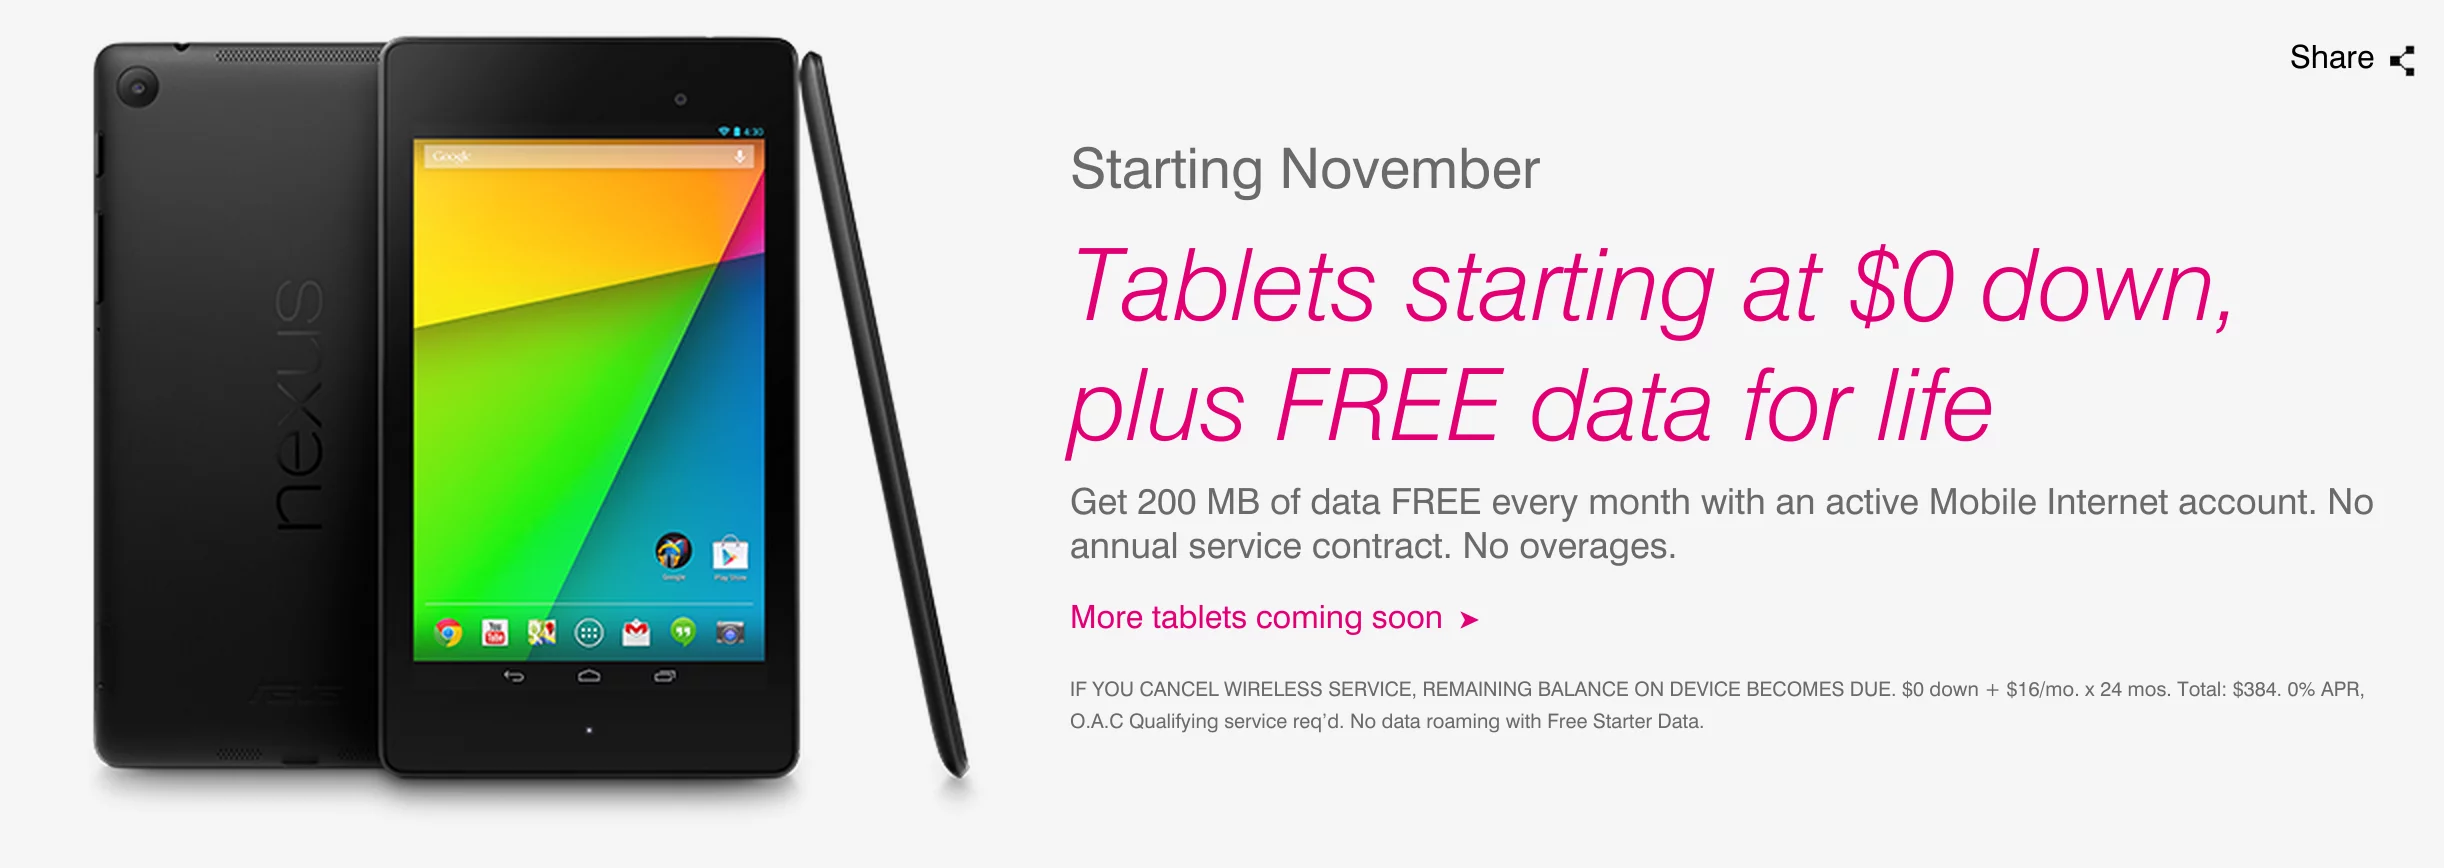 T Mobile tablets - for some reason we don't have an alt tag here